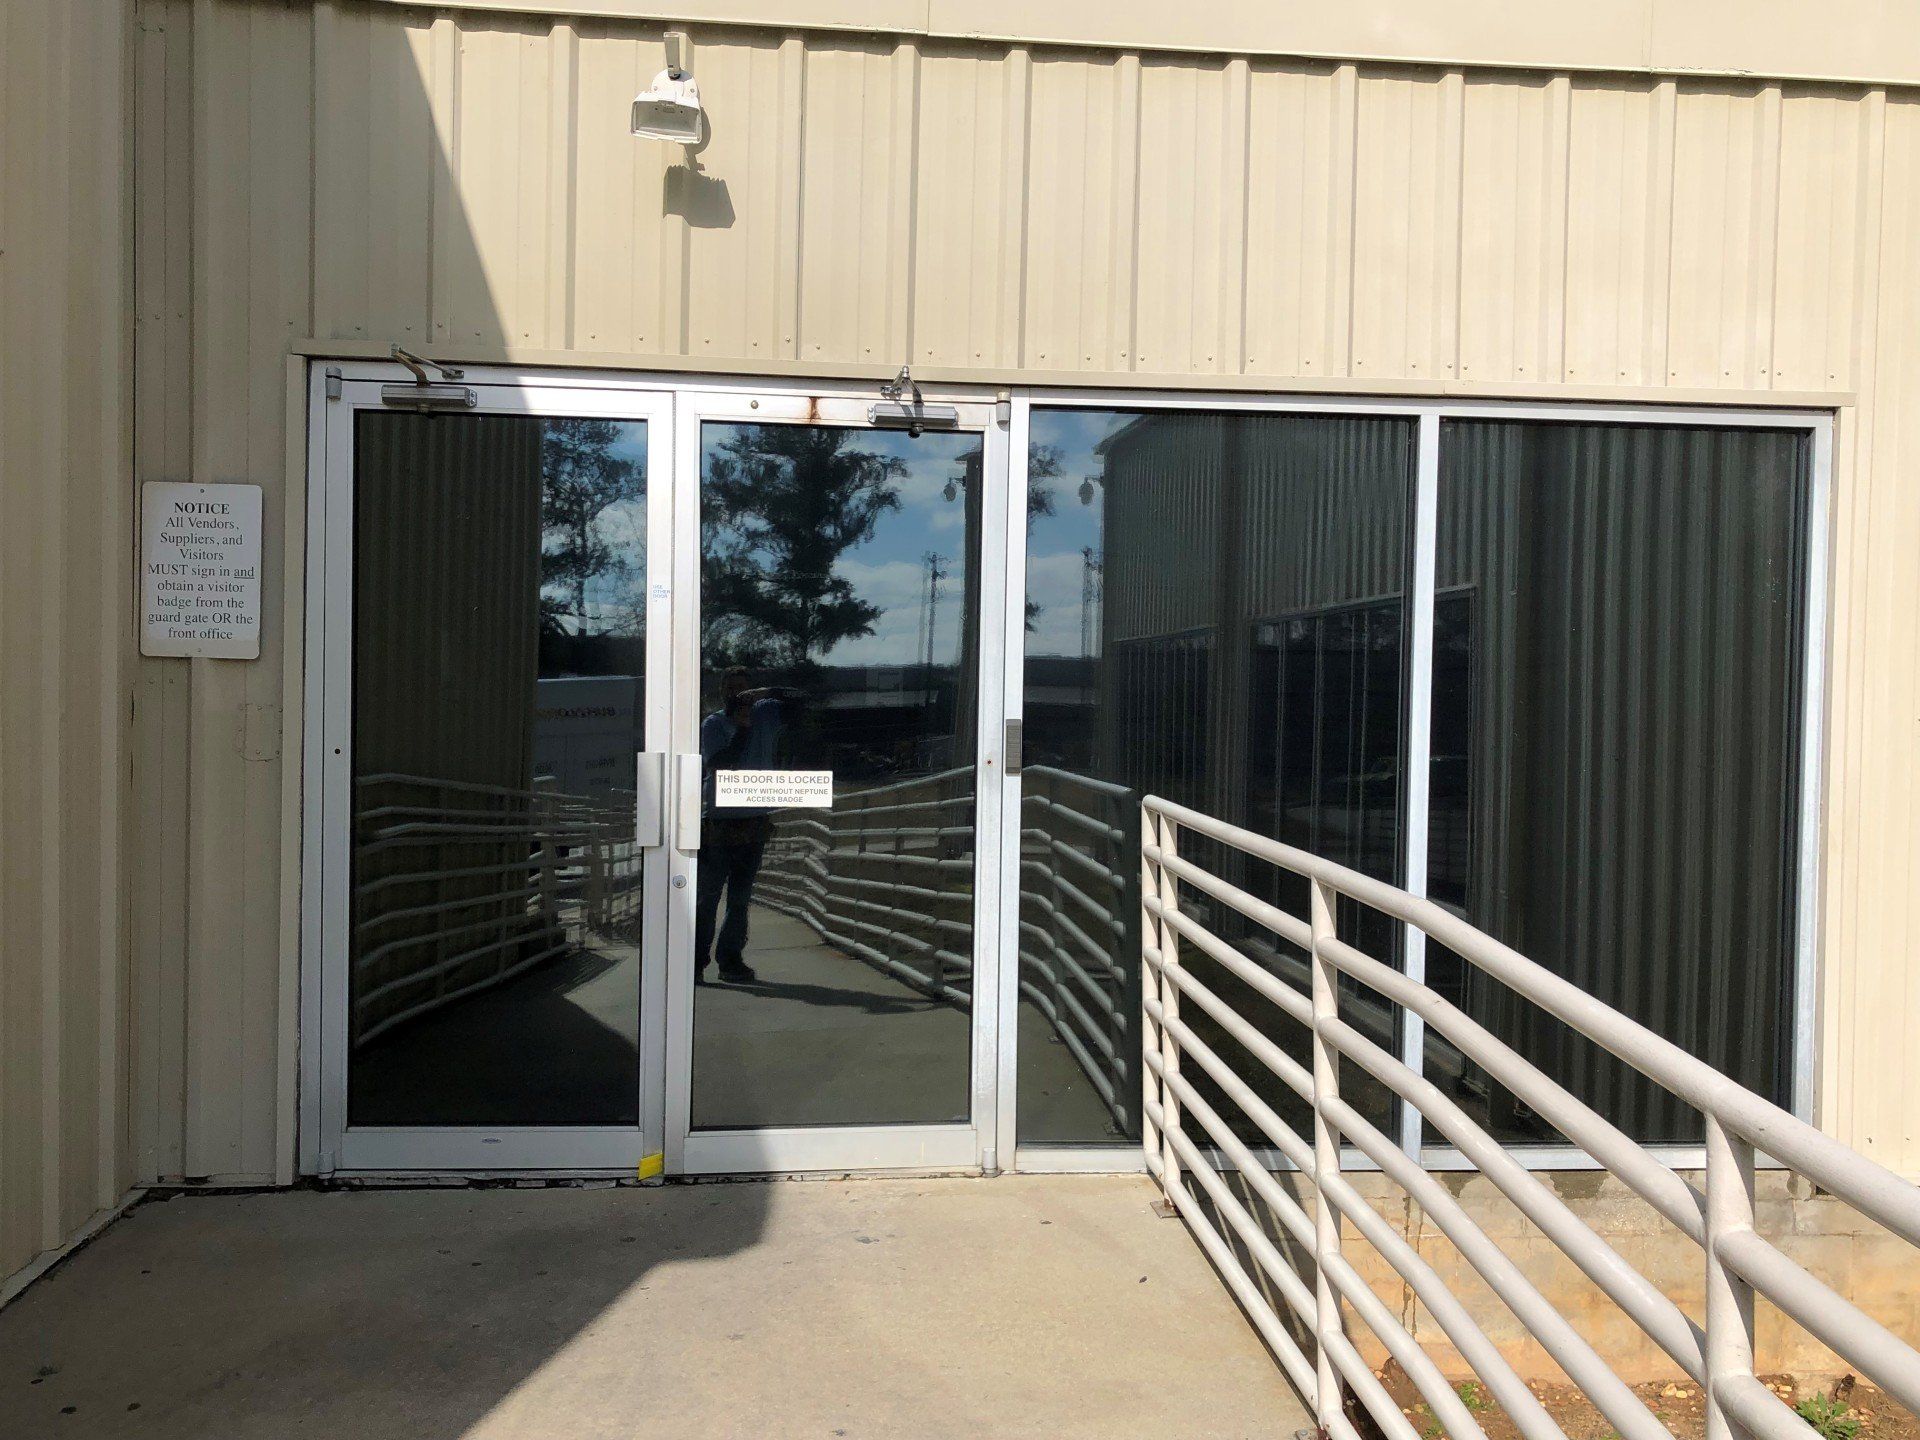 Tallassee Business tinting after professional tint installed on business windows January 24 2019 - commercial window tinting replacement service in Tallassee, AL